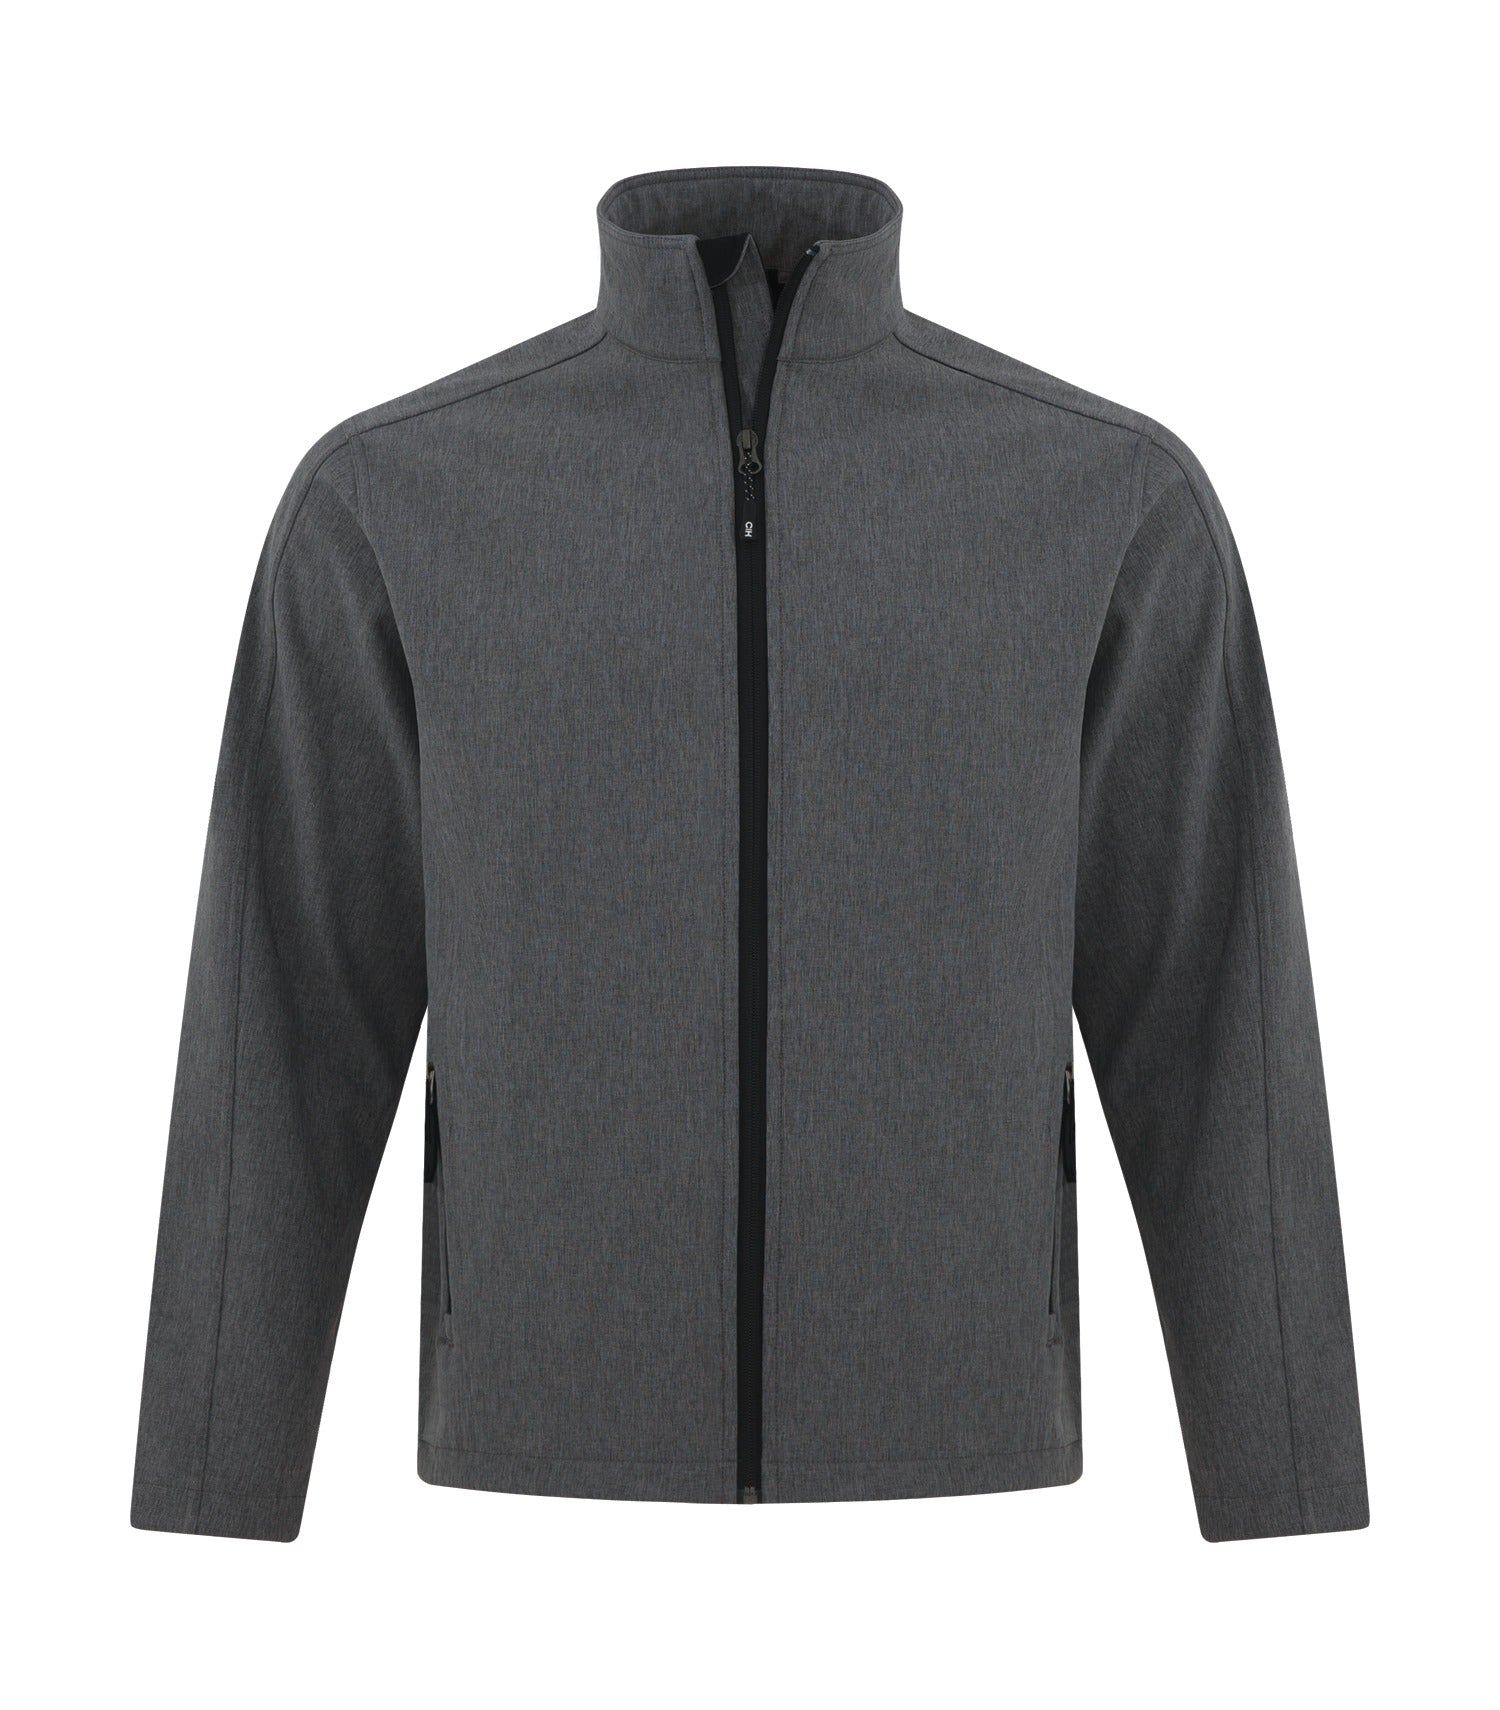 COAL HARBOUR® EVERYDAY WATER REPELLENT SOFT SHELL JACKET. J7603